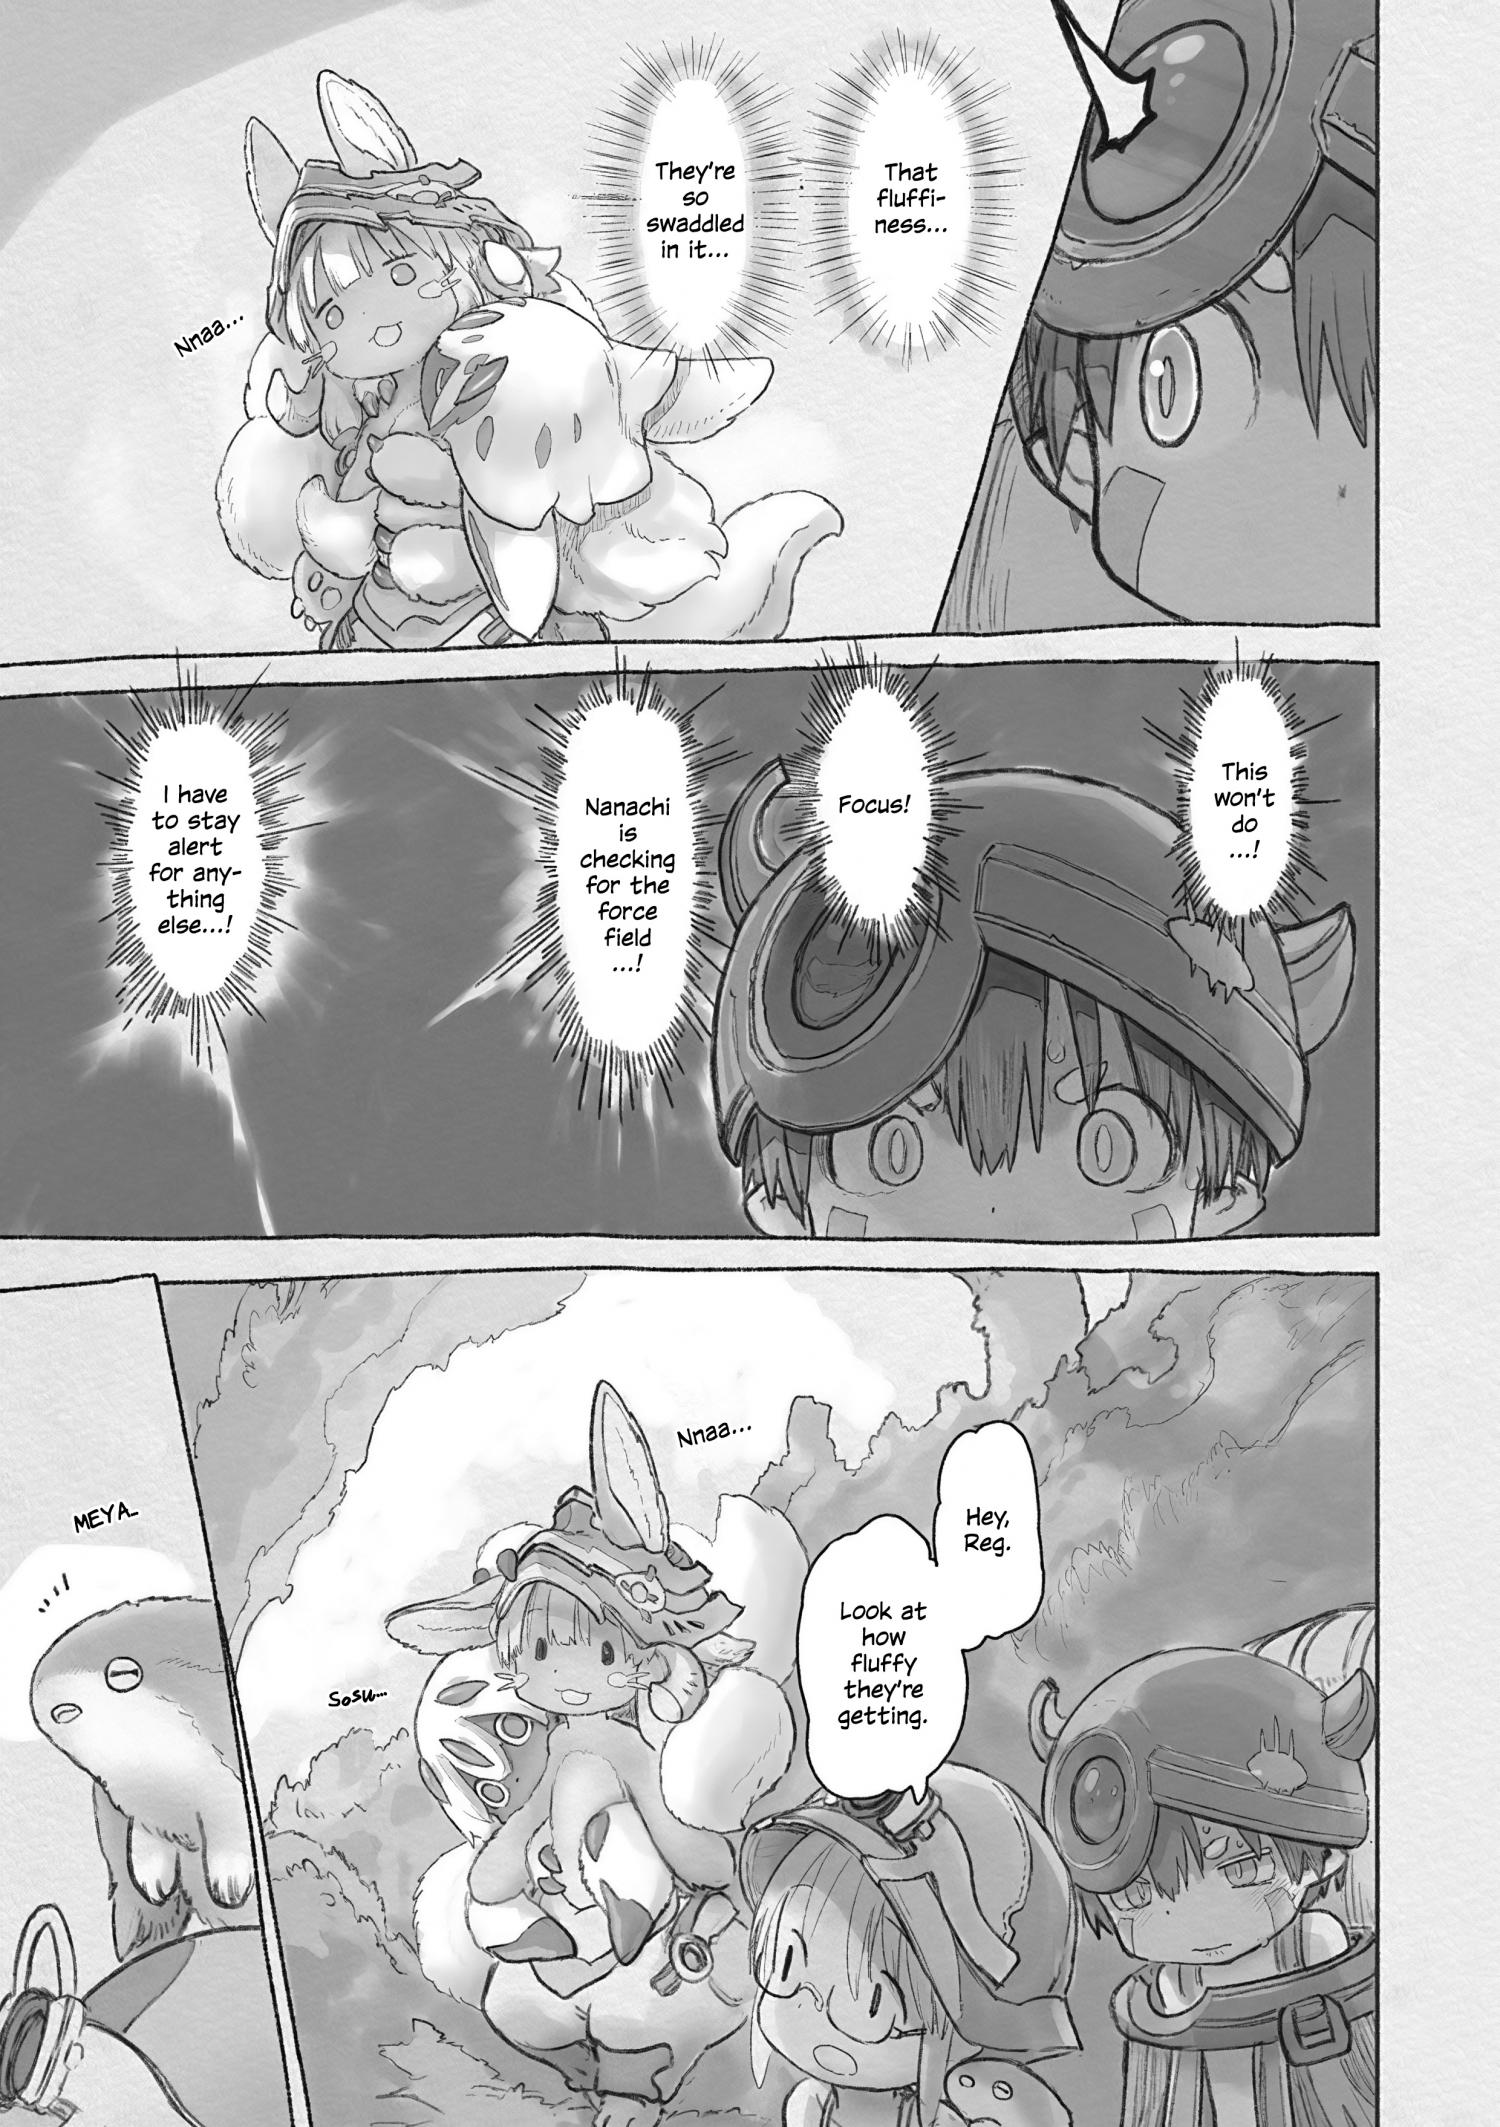 Made In Abyss Chapter 62 Made in Abyss Vol.11 Ch.62 Page 16 - Mangago